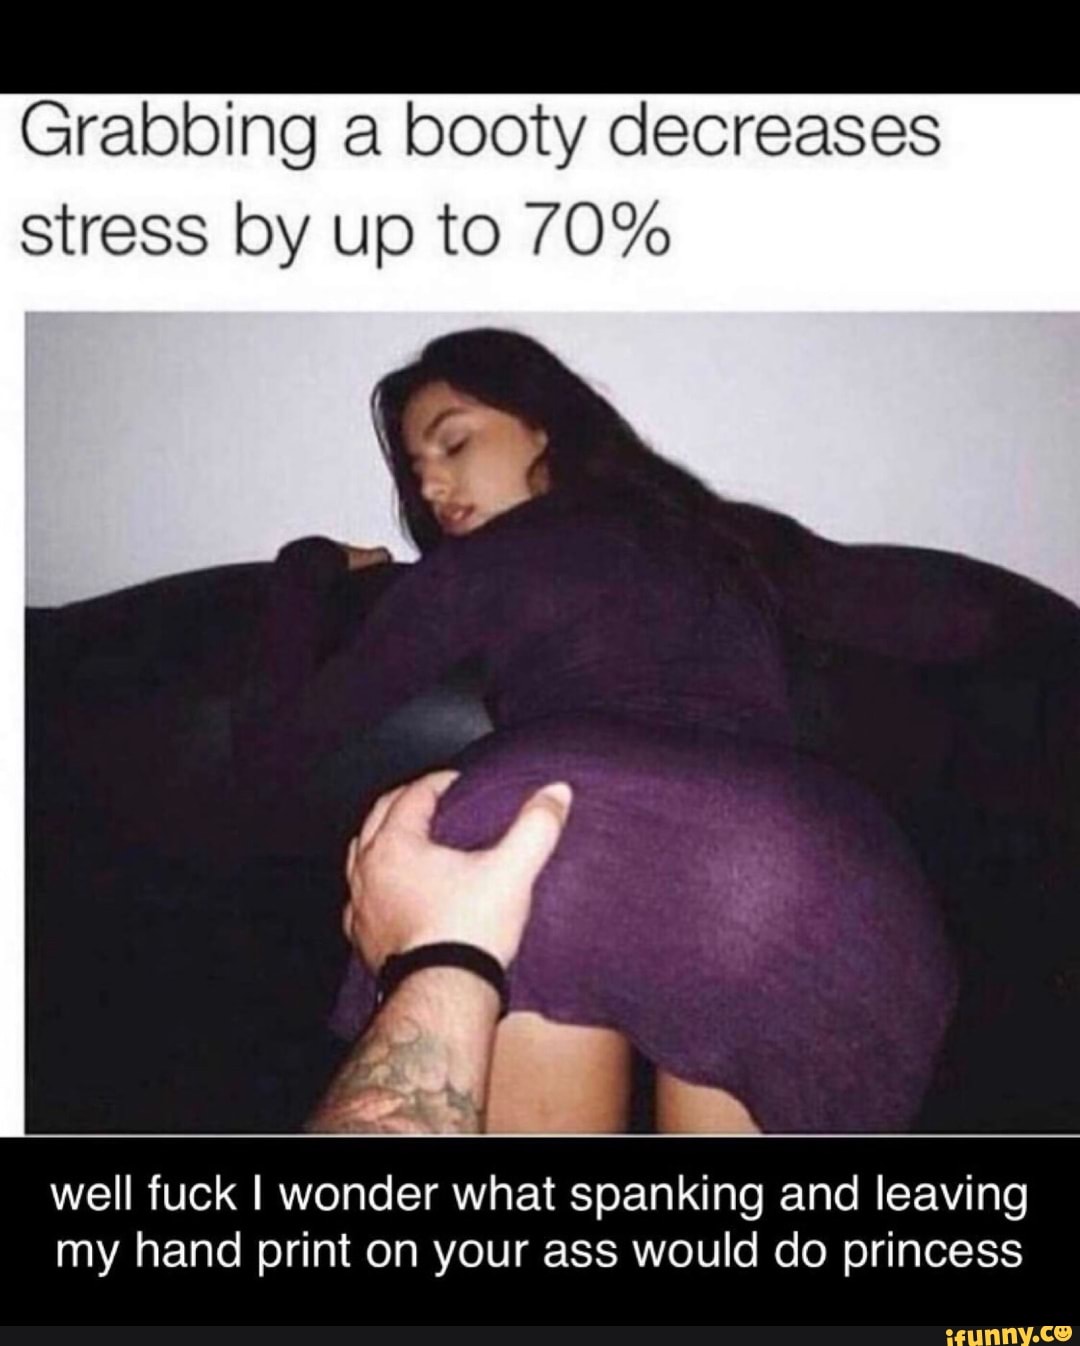 Grabbing a booty decreases stress by up to 70% well fuck I wonder what span...